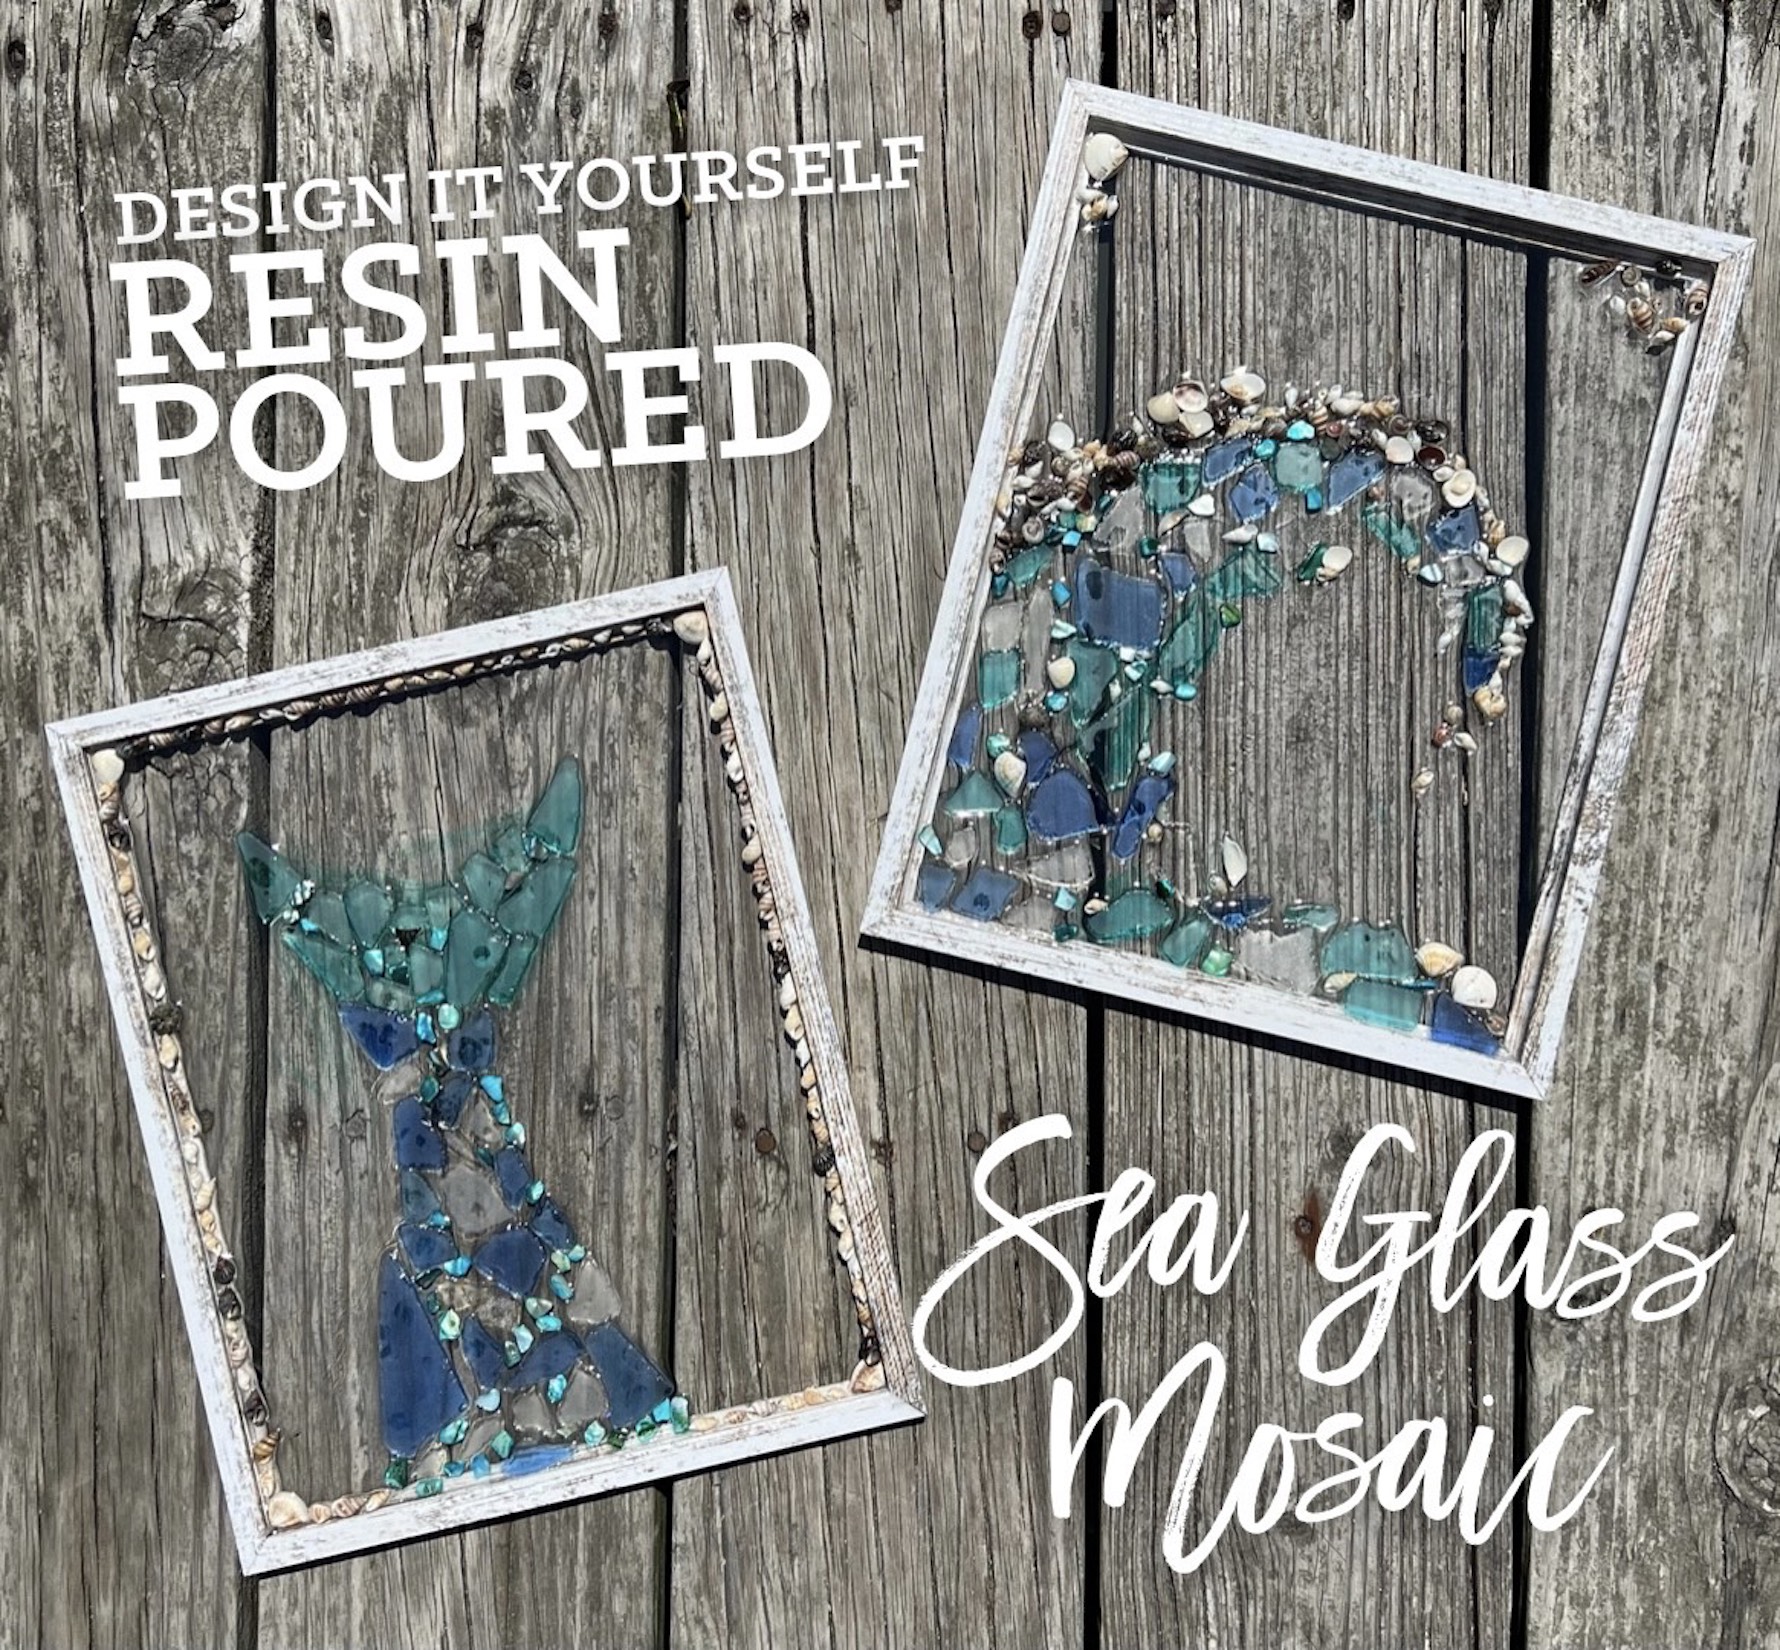 RESIN POURED SEA GLASS MOSAIC WORKSHOP